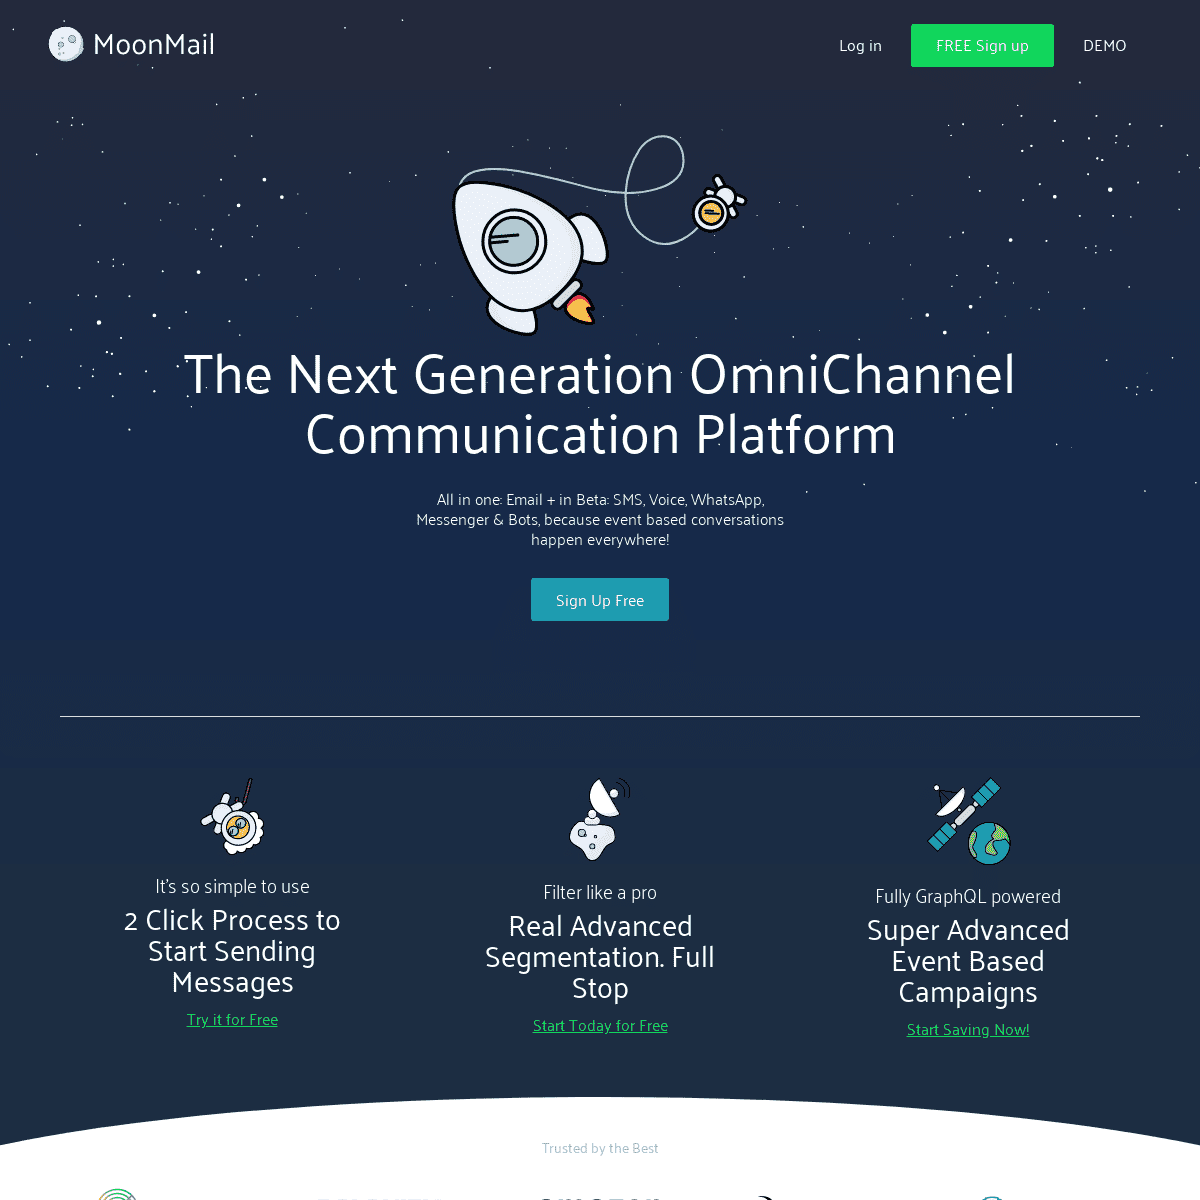 A complete backup of moonmail.io